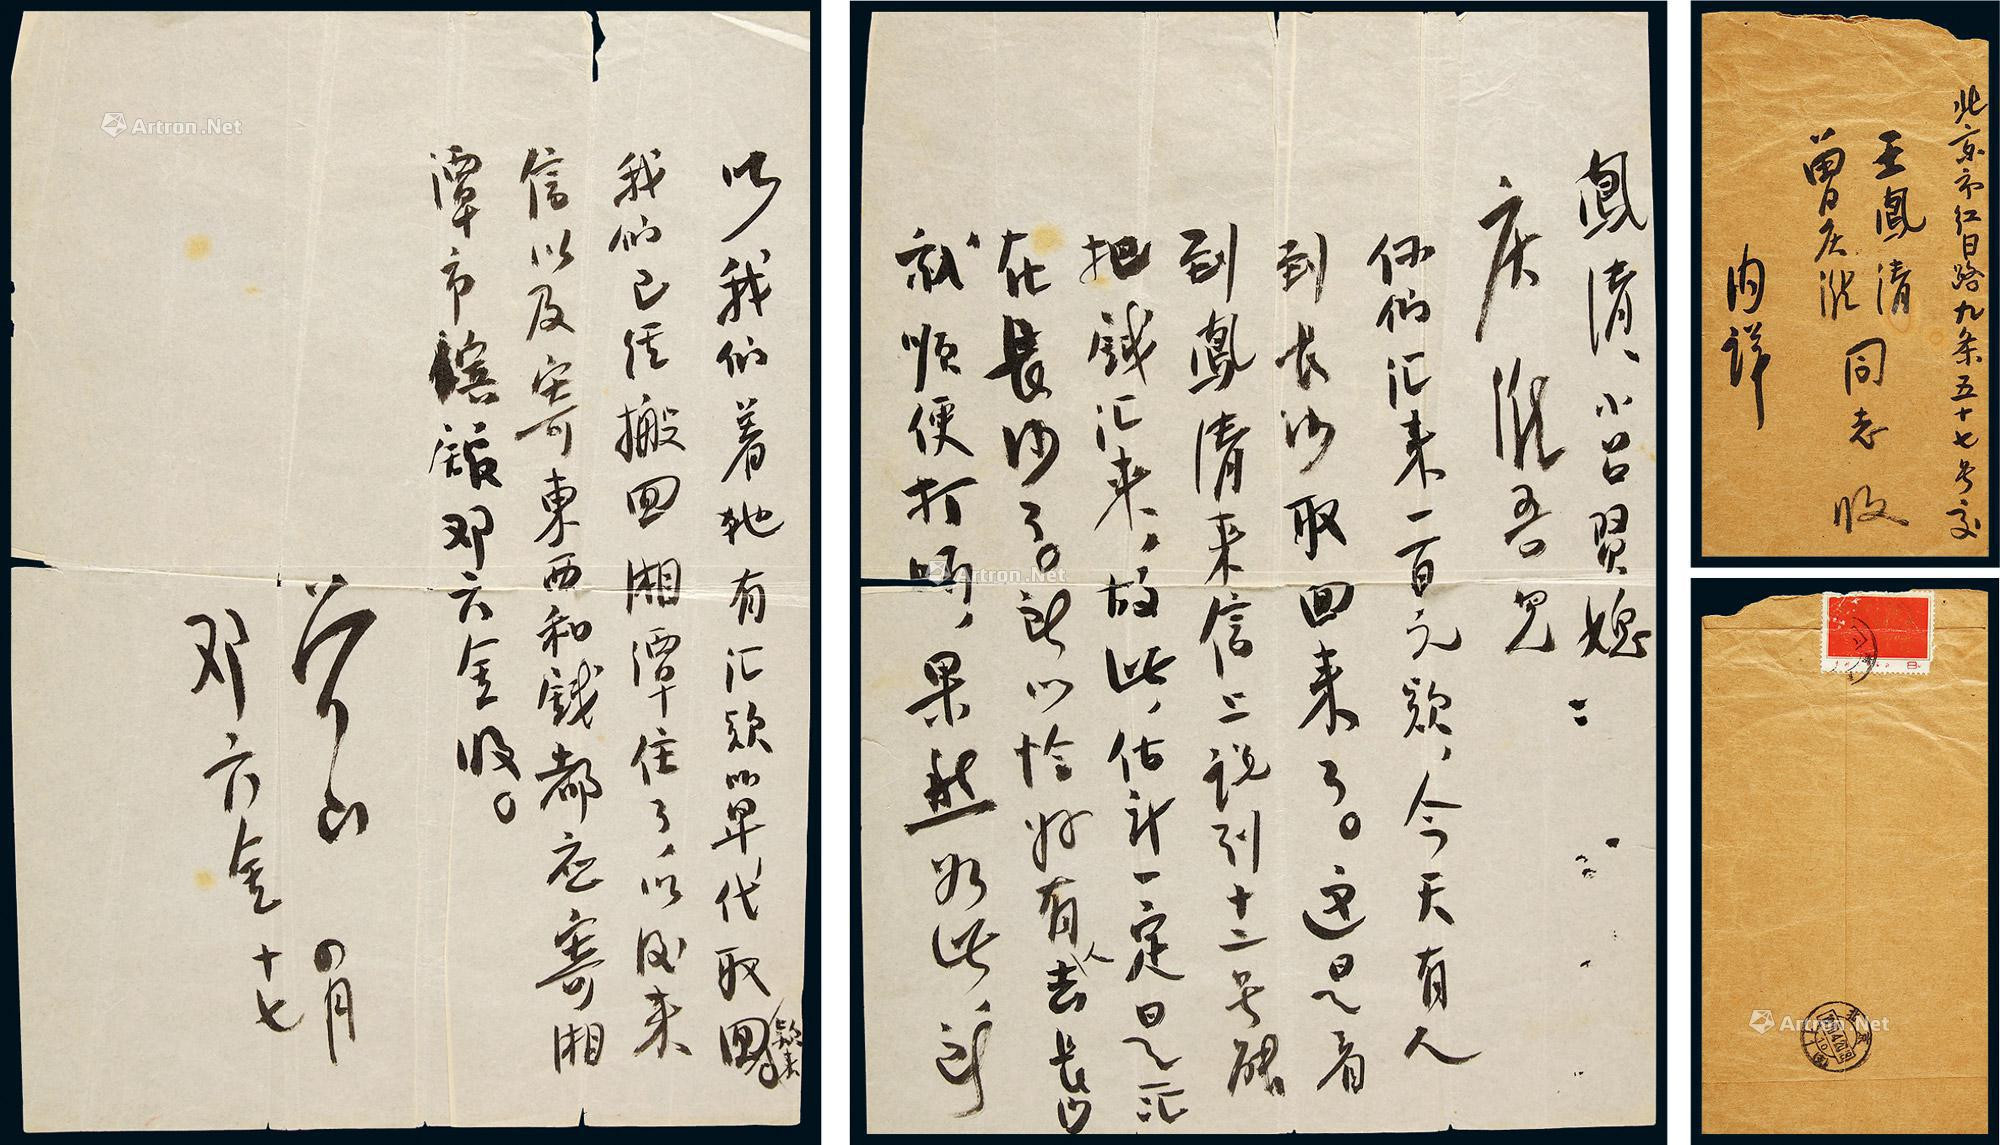 One letter of two pages to family by Tsang Shan and his wife Tang Luk-kin to their children in 1970, with cover